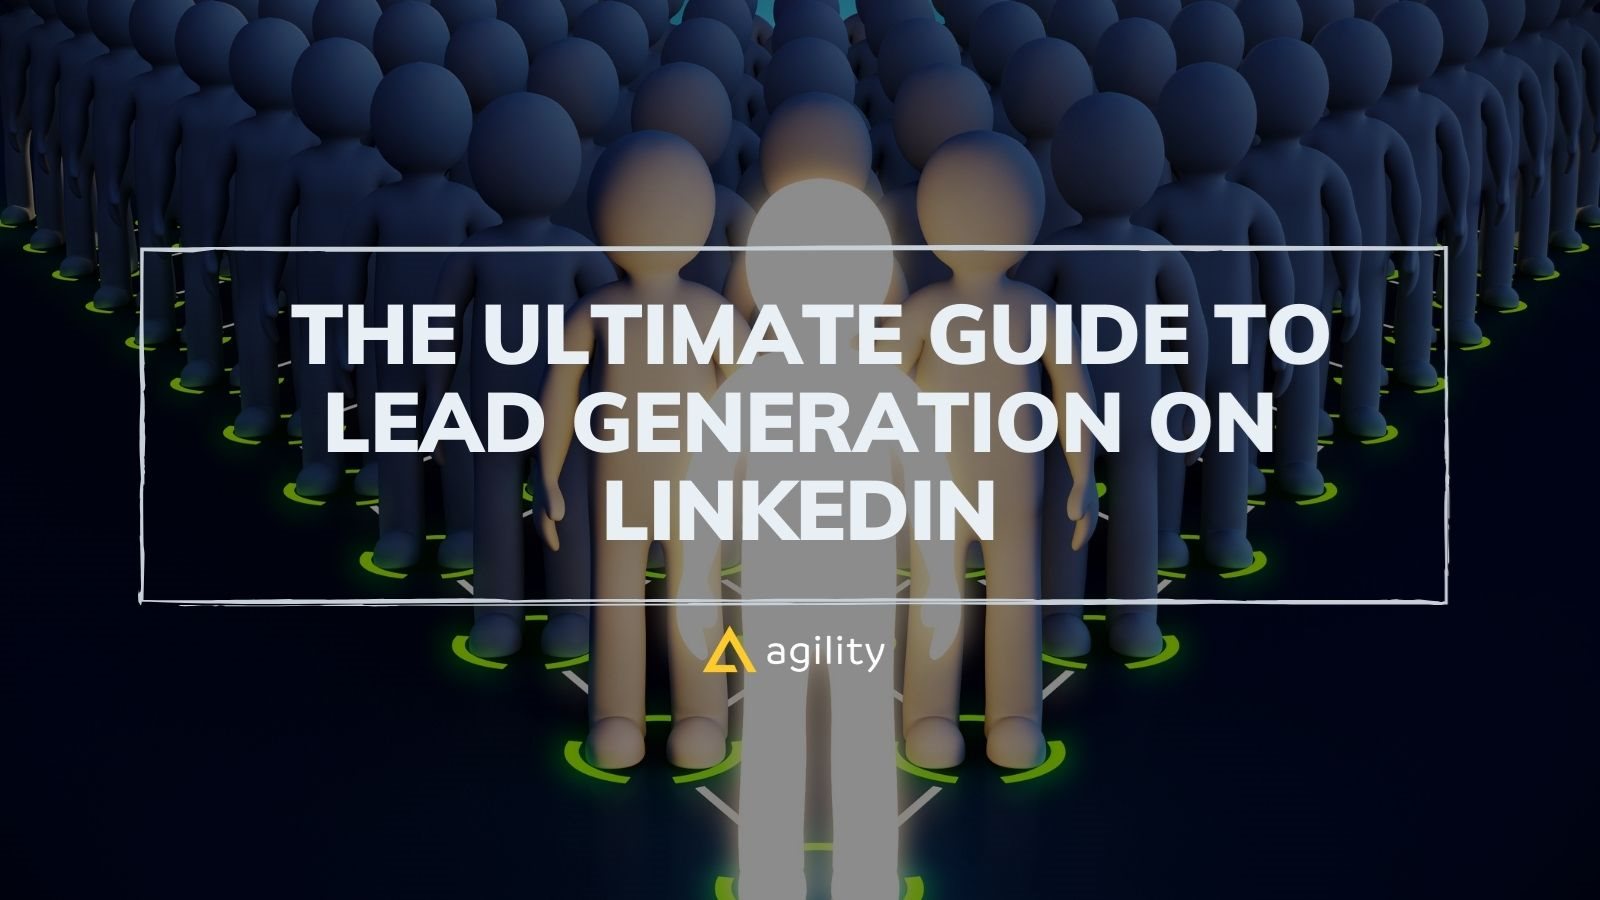 The Ultimate Guide to Lead Generation on LinkedIn